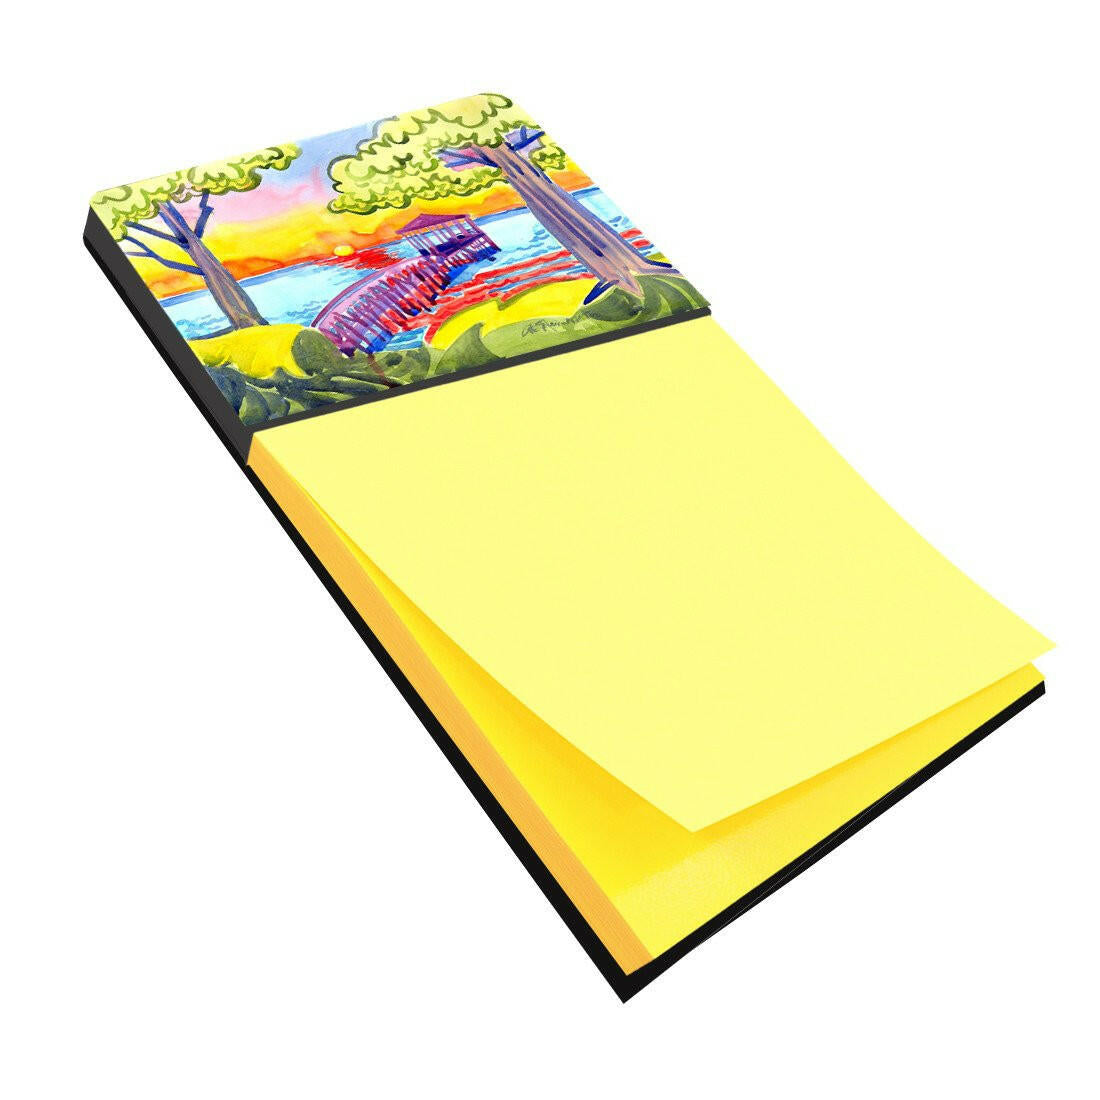 Dock at the pier Refiillable Sticky Note Holder or Postit Note Dispenser 6060SN by Caroline's Treasures